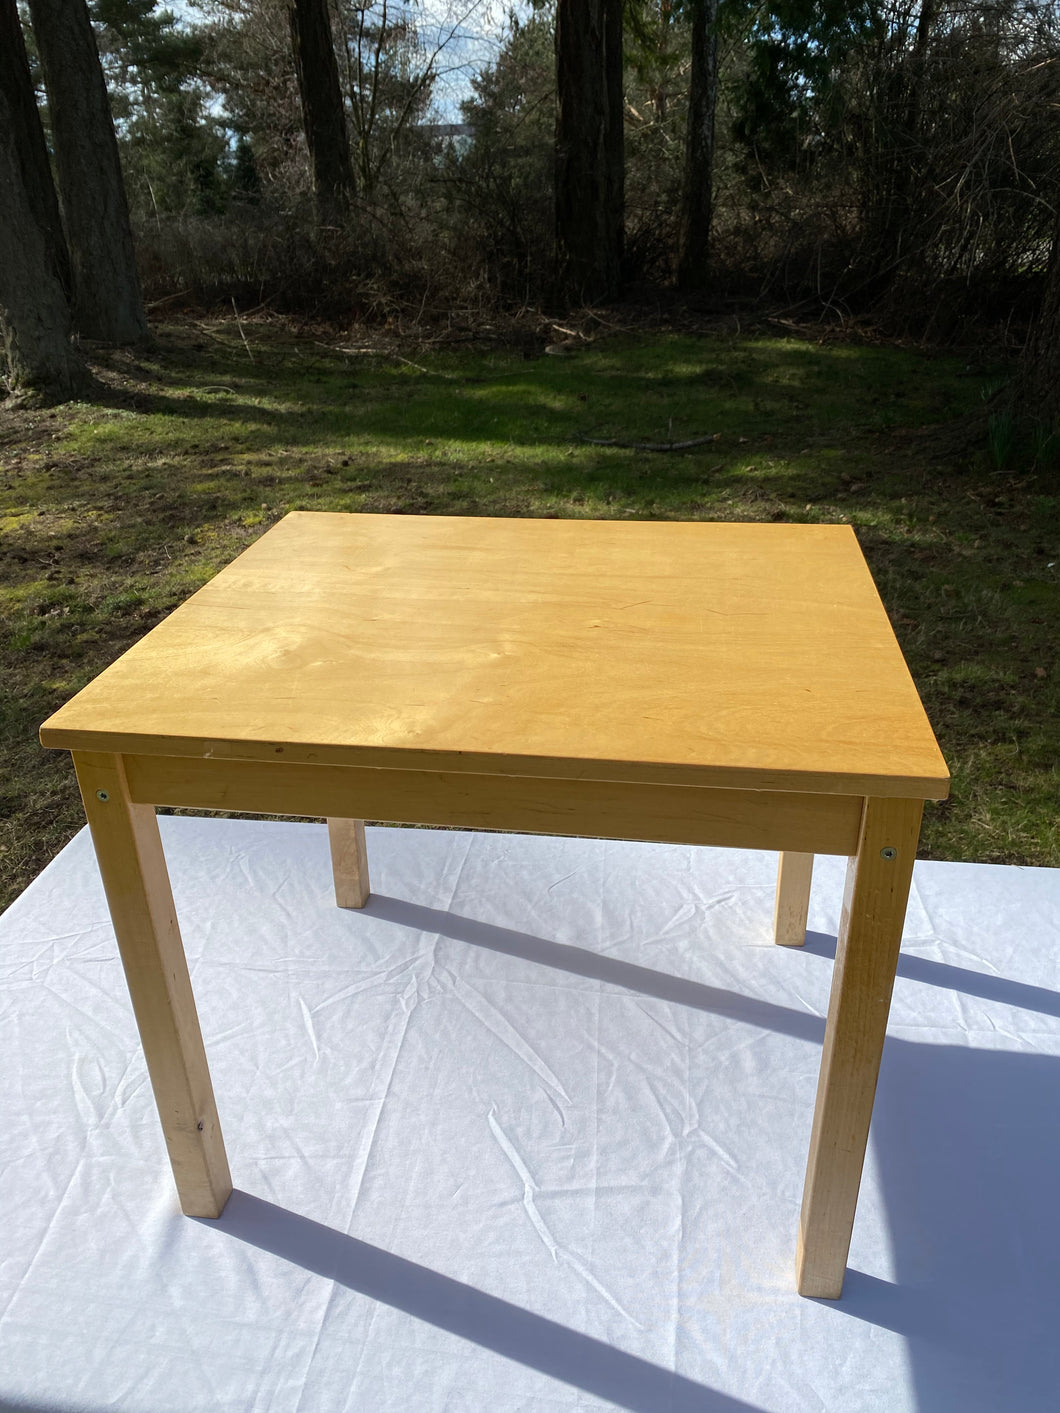 Wooden Table # : ? Inches